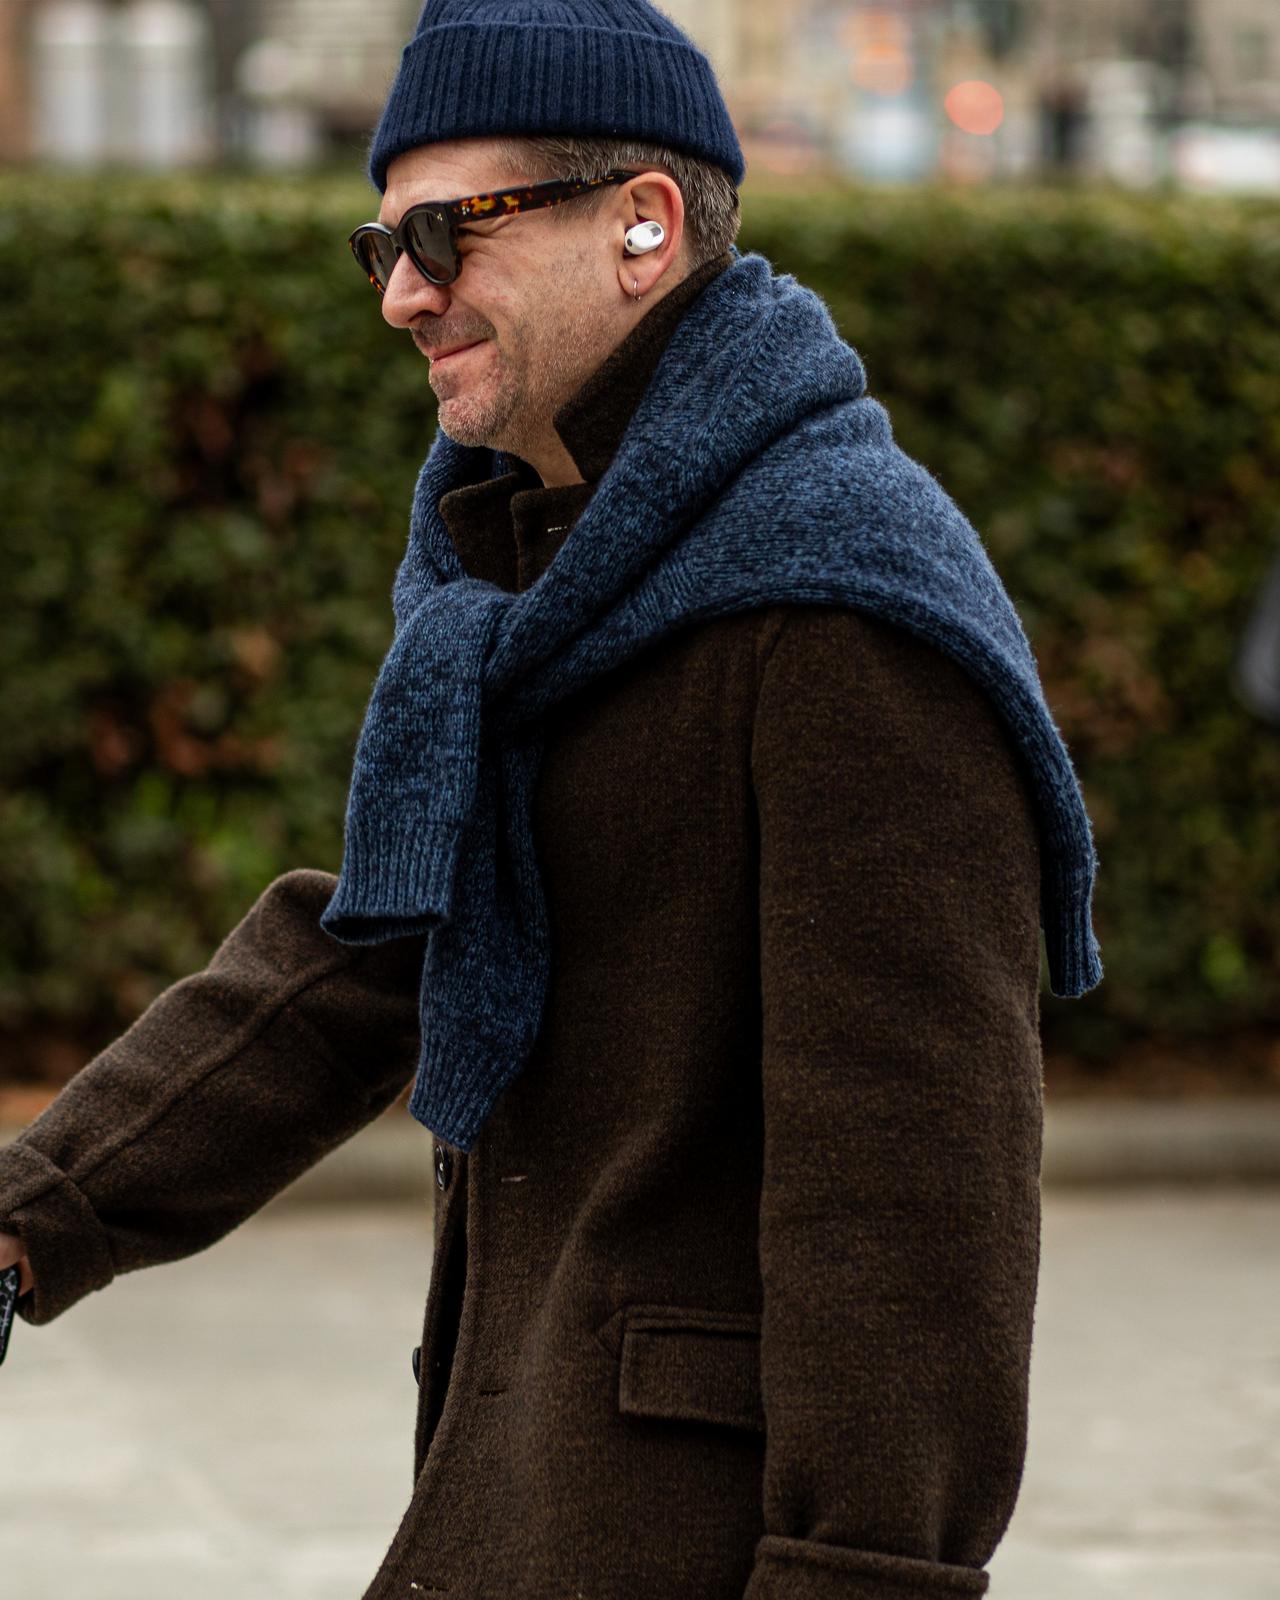 A man in a blue jacket and scarf walking down the street